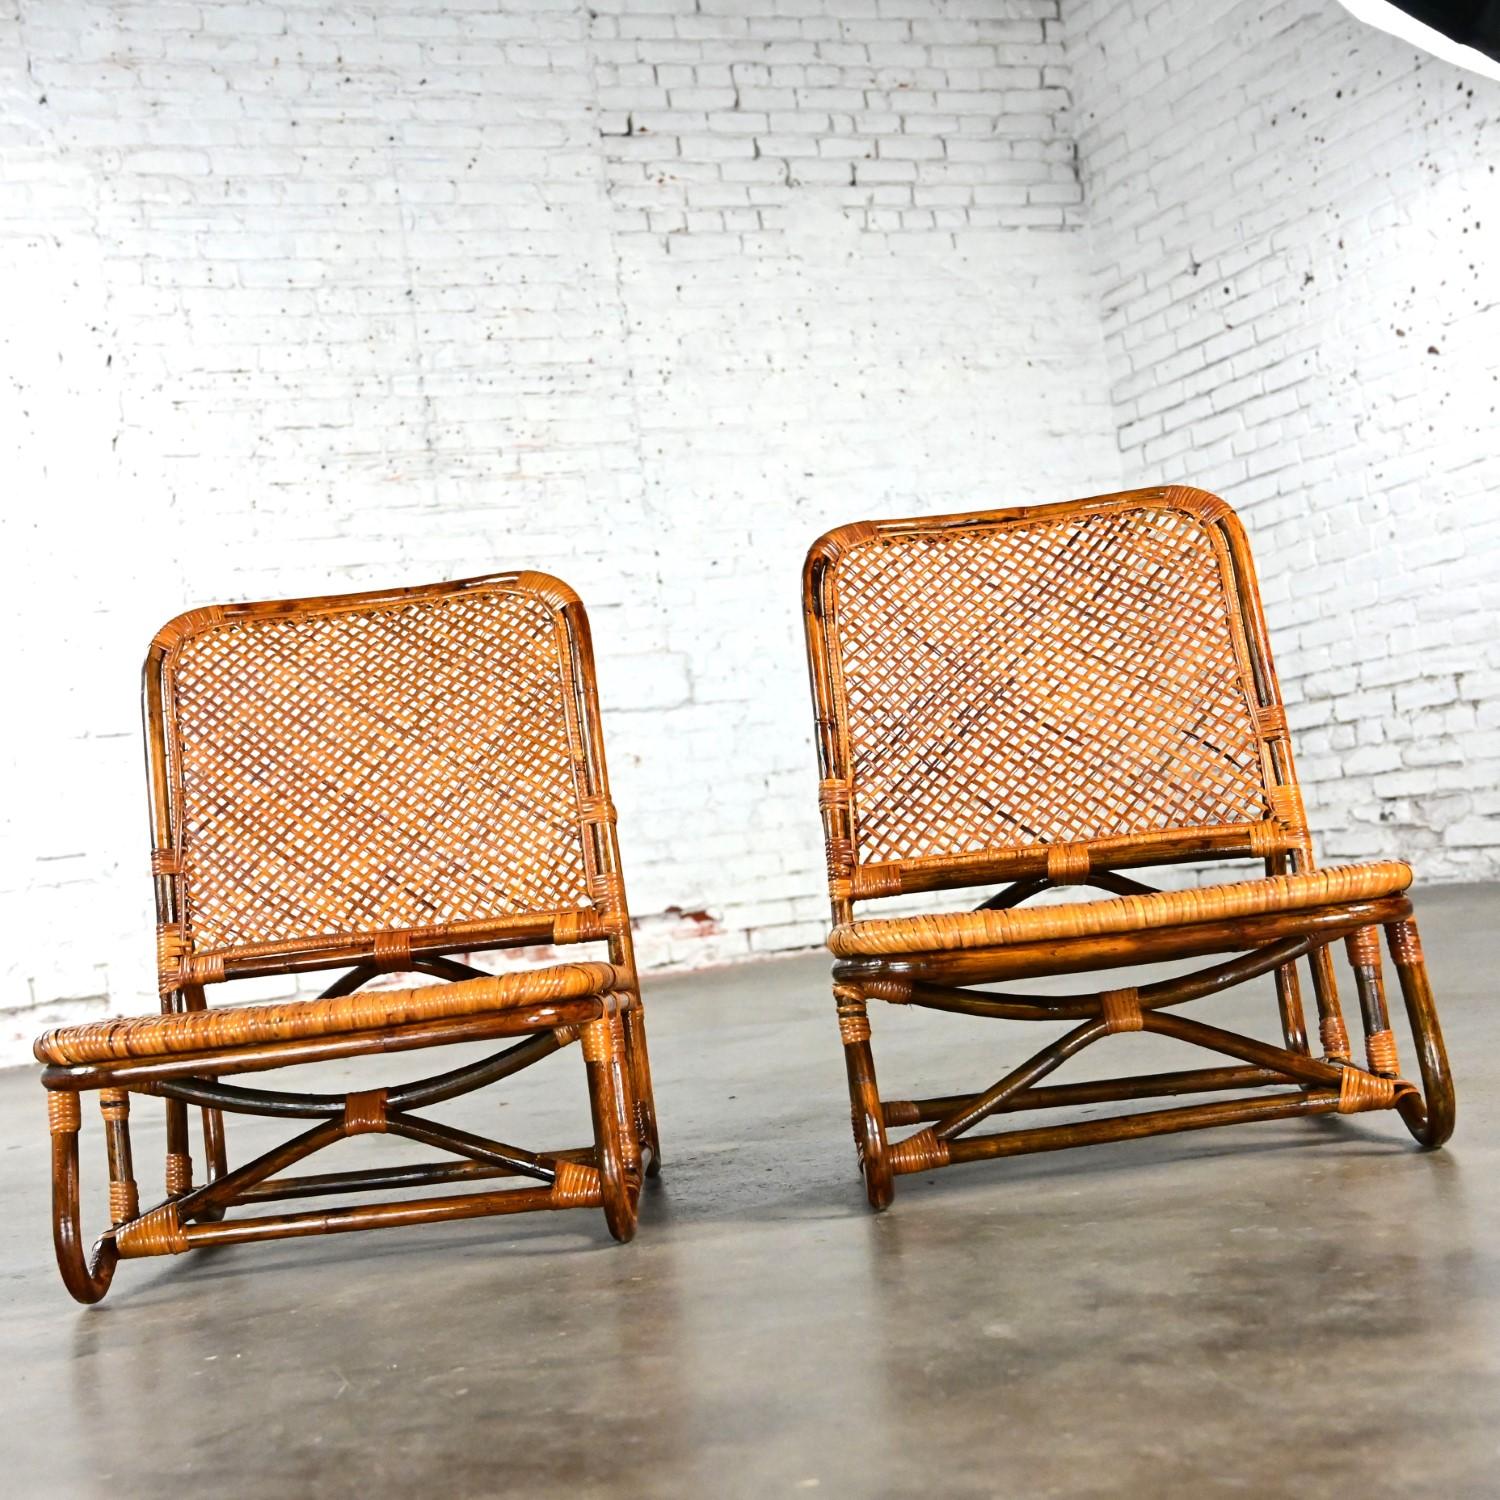 Incredible Mid-20th Century Coastal Island Rattan & wicker Low, Legless, or Japanese “Zaisu” lounge chairs in the style of Calif Asia, a pair.  Beautiful condition, keeping in mind that these are vintage and not new so will have signs of use and